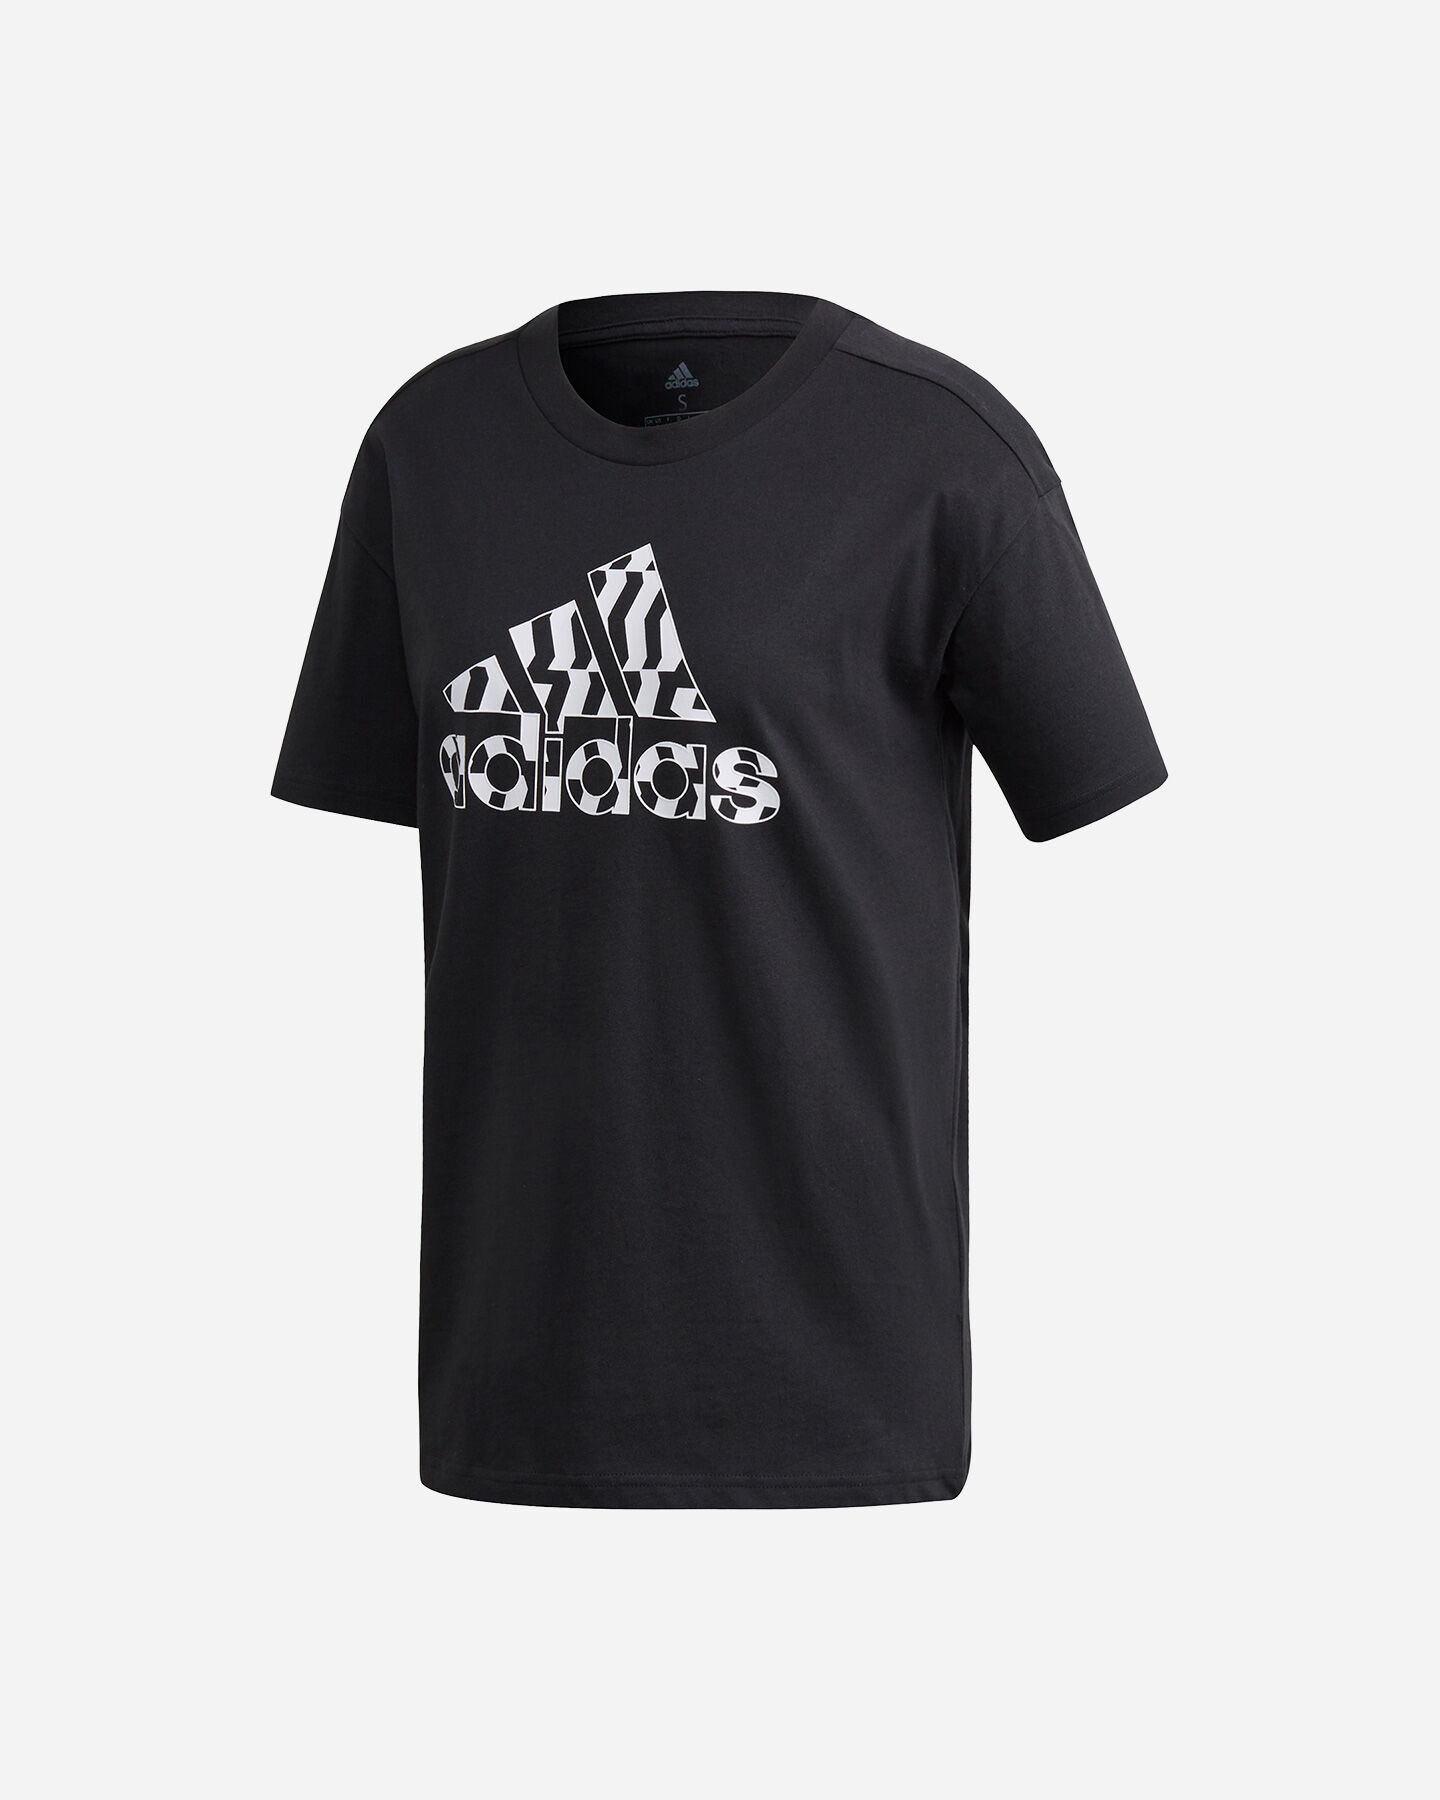  T-Shirt ADIDAS MUST HAVES GRAPHIC W S5154553|UNI|XS scatto 0